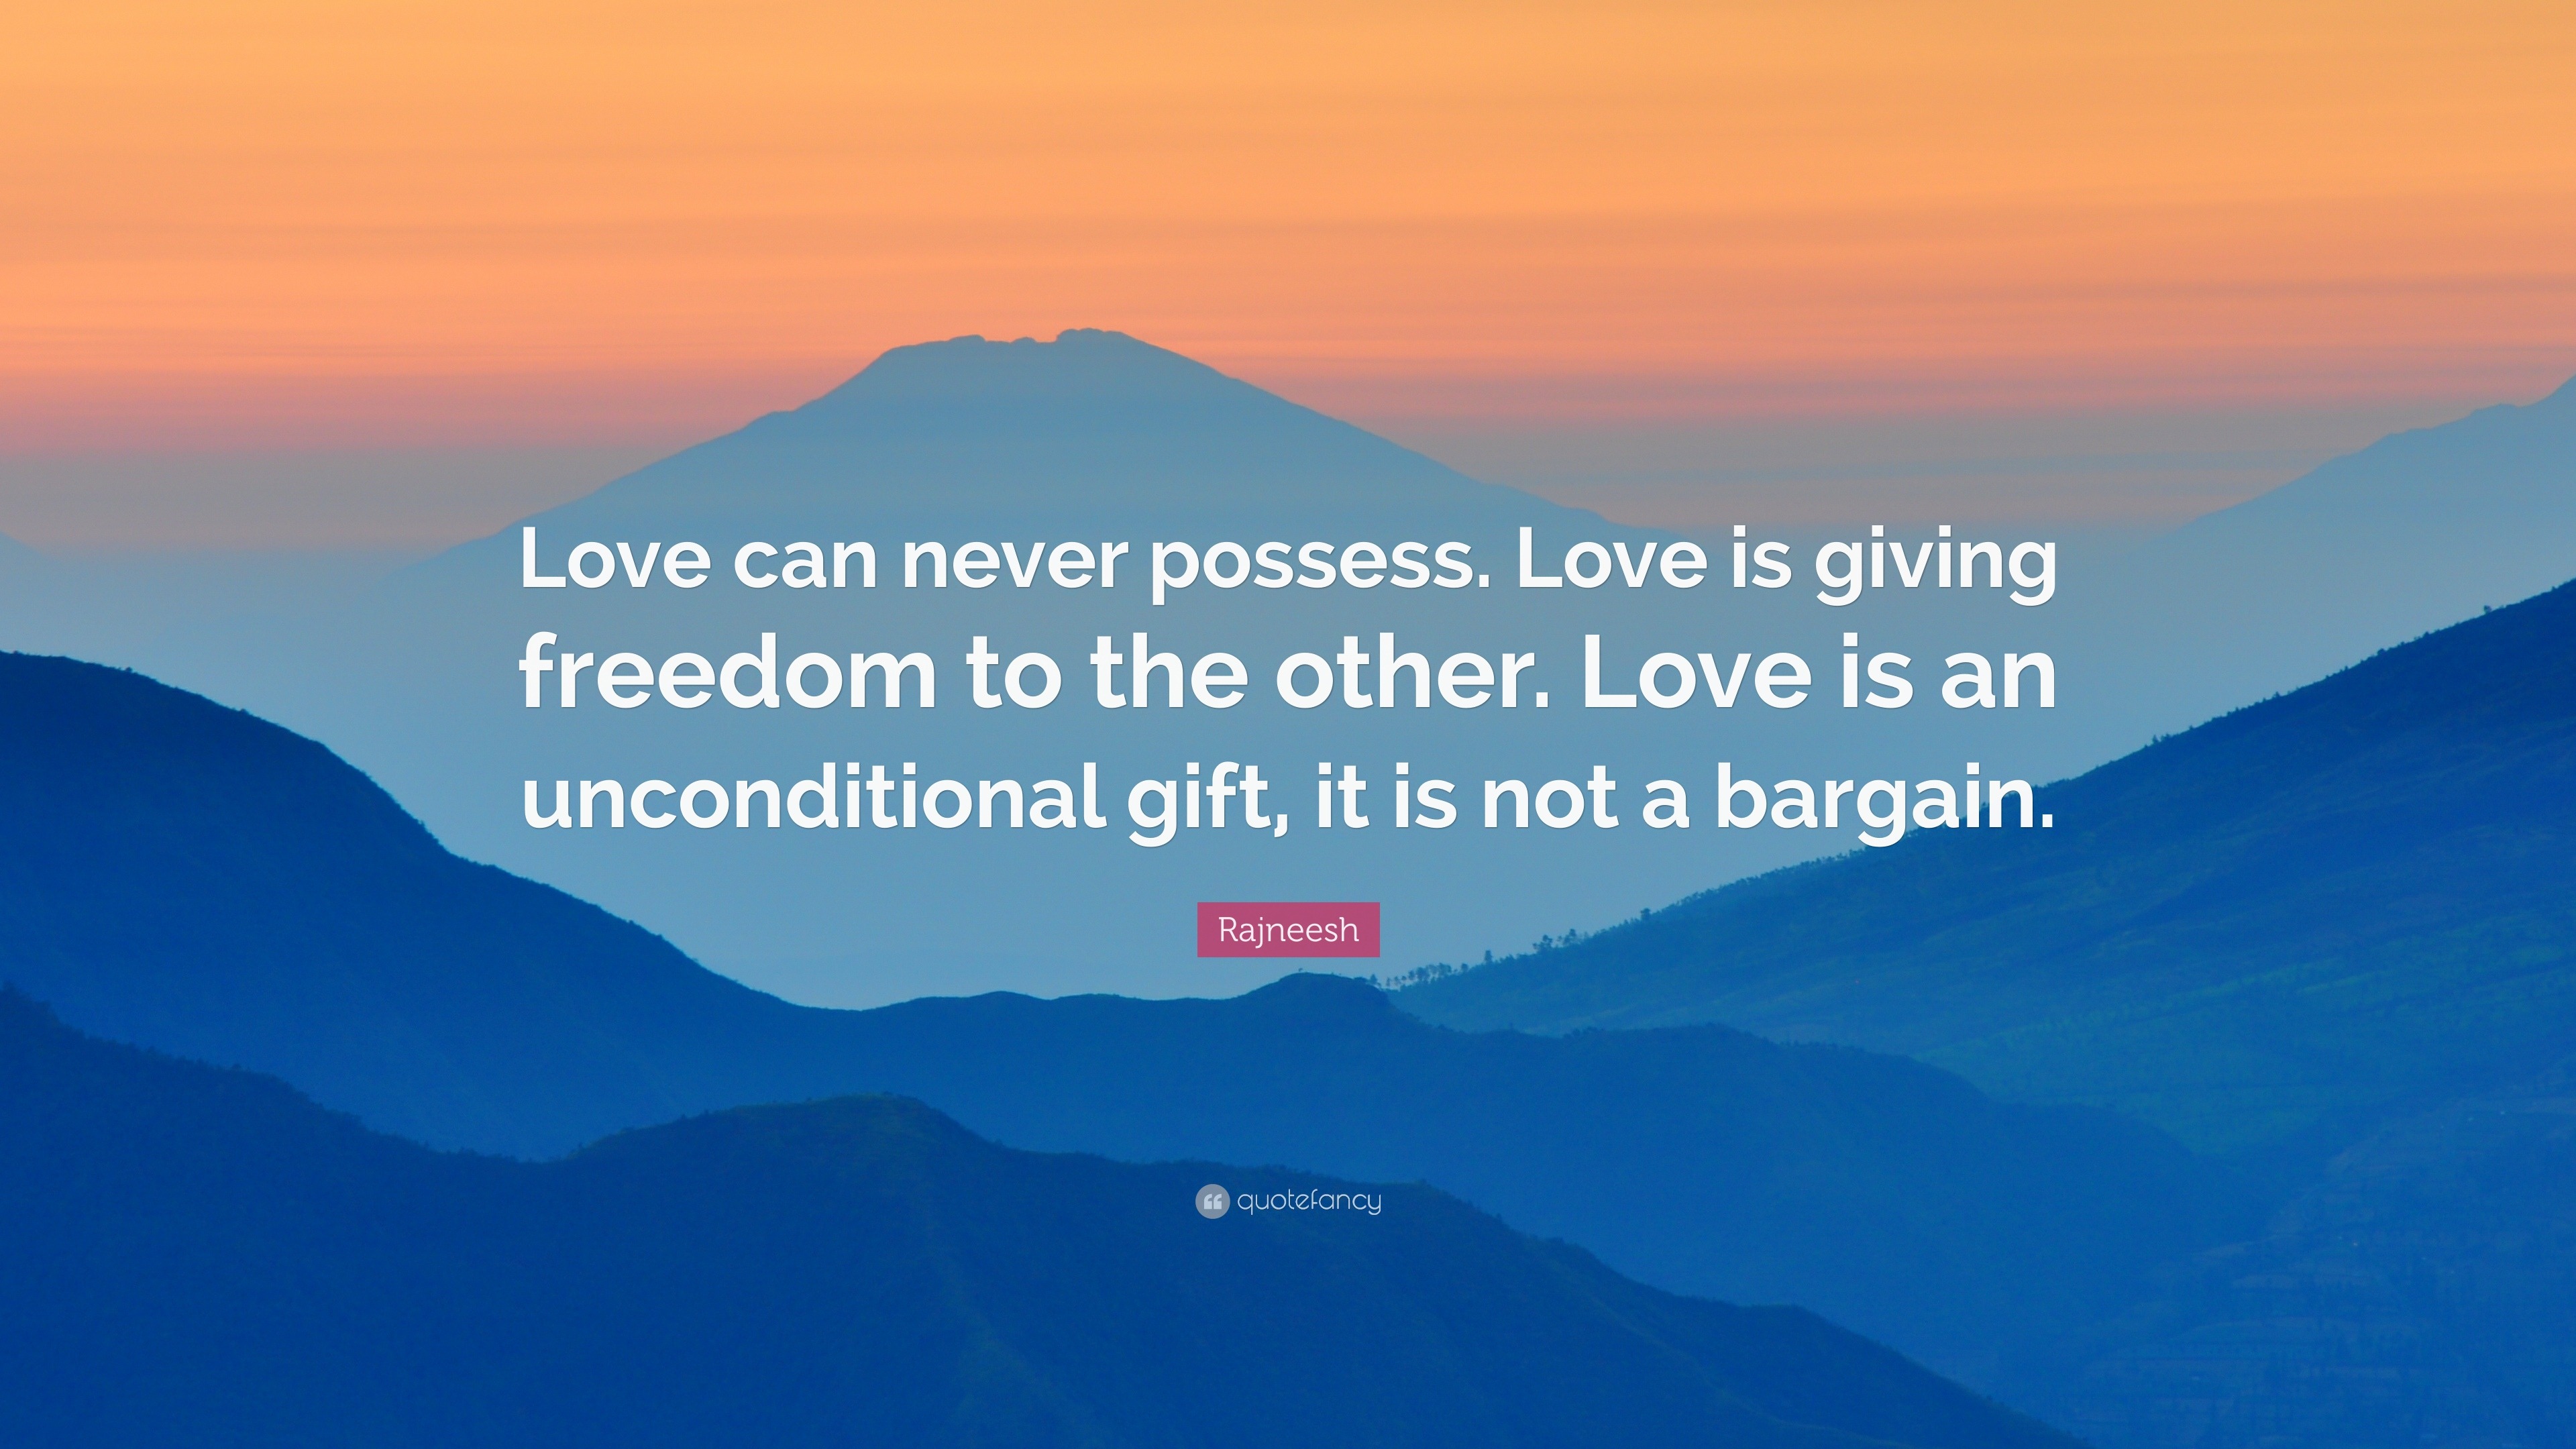 Rajneesh Quote “Love can never possess Love is giving freedom to the other